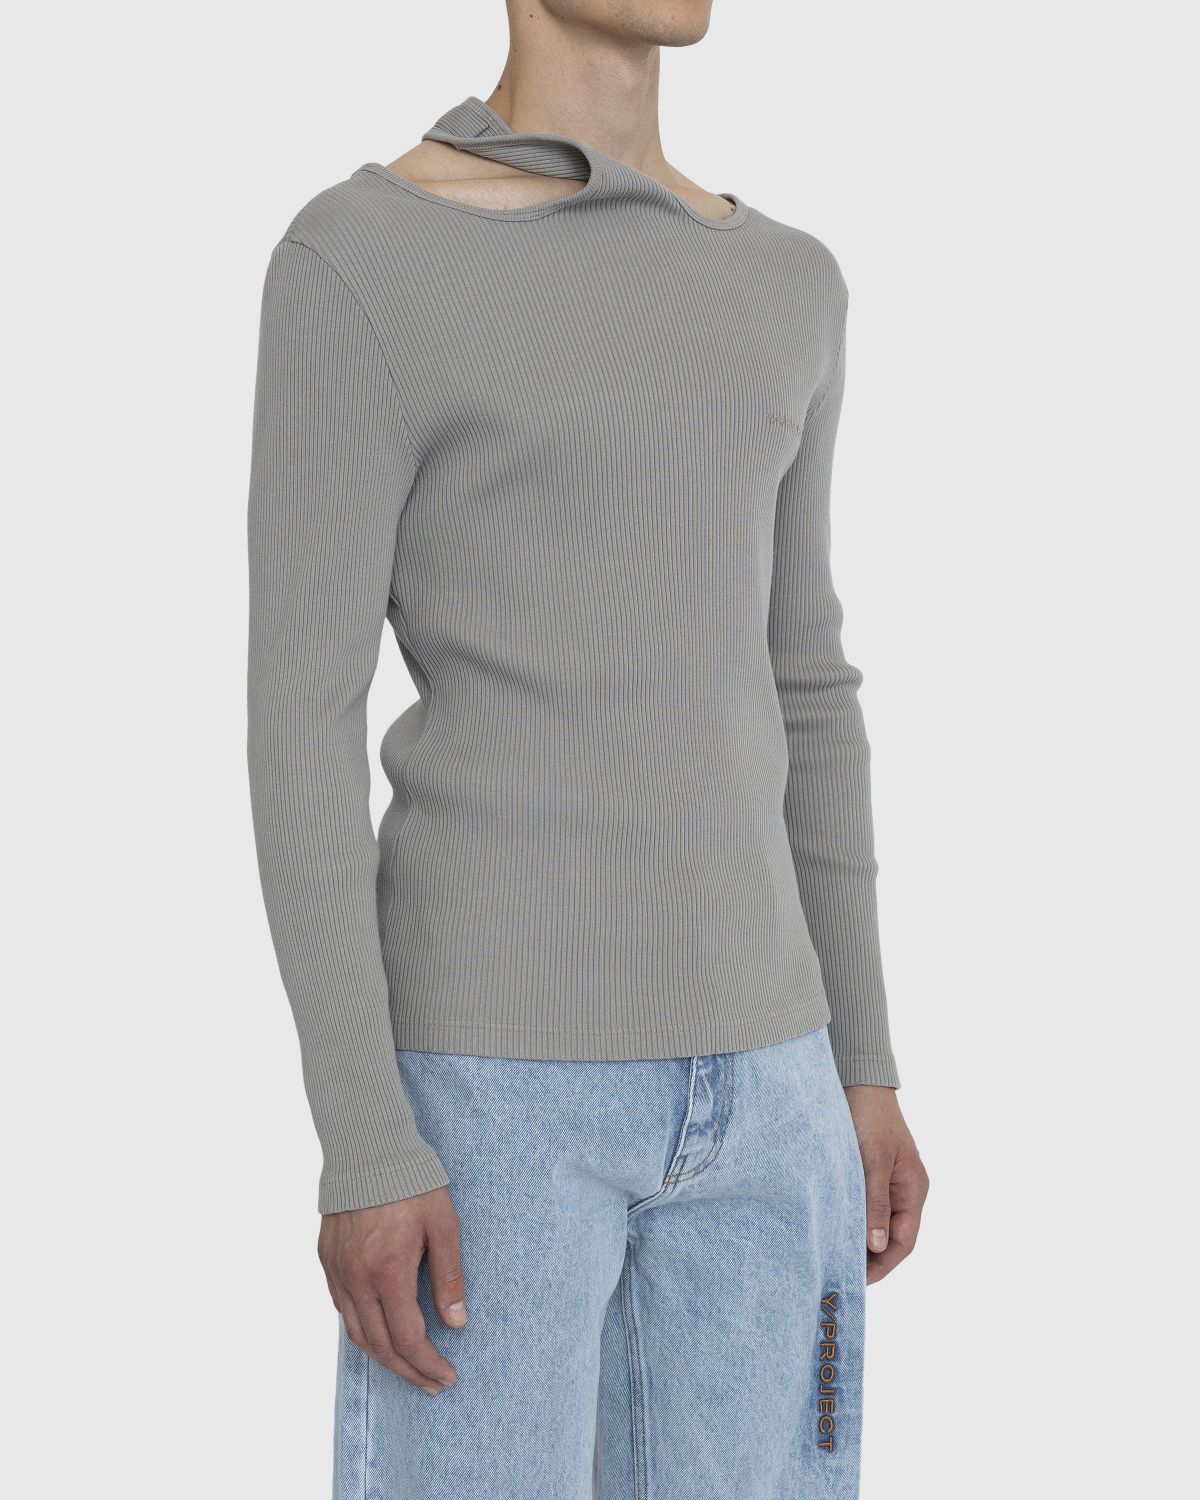 Y/Project – Classic Double Collar T-Shirt Taupe - Longsleeves - Grey - Image 3